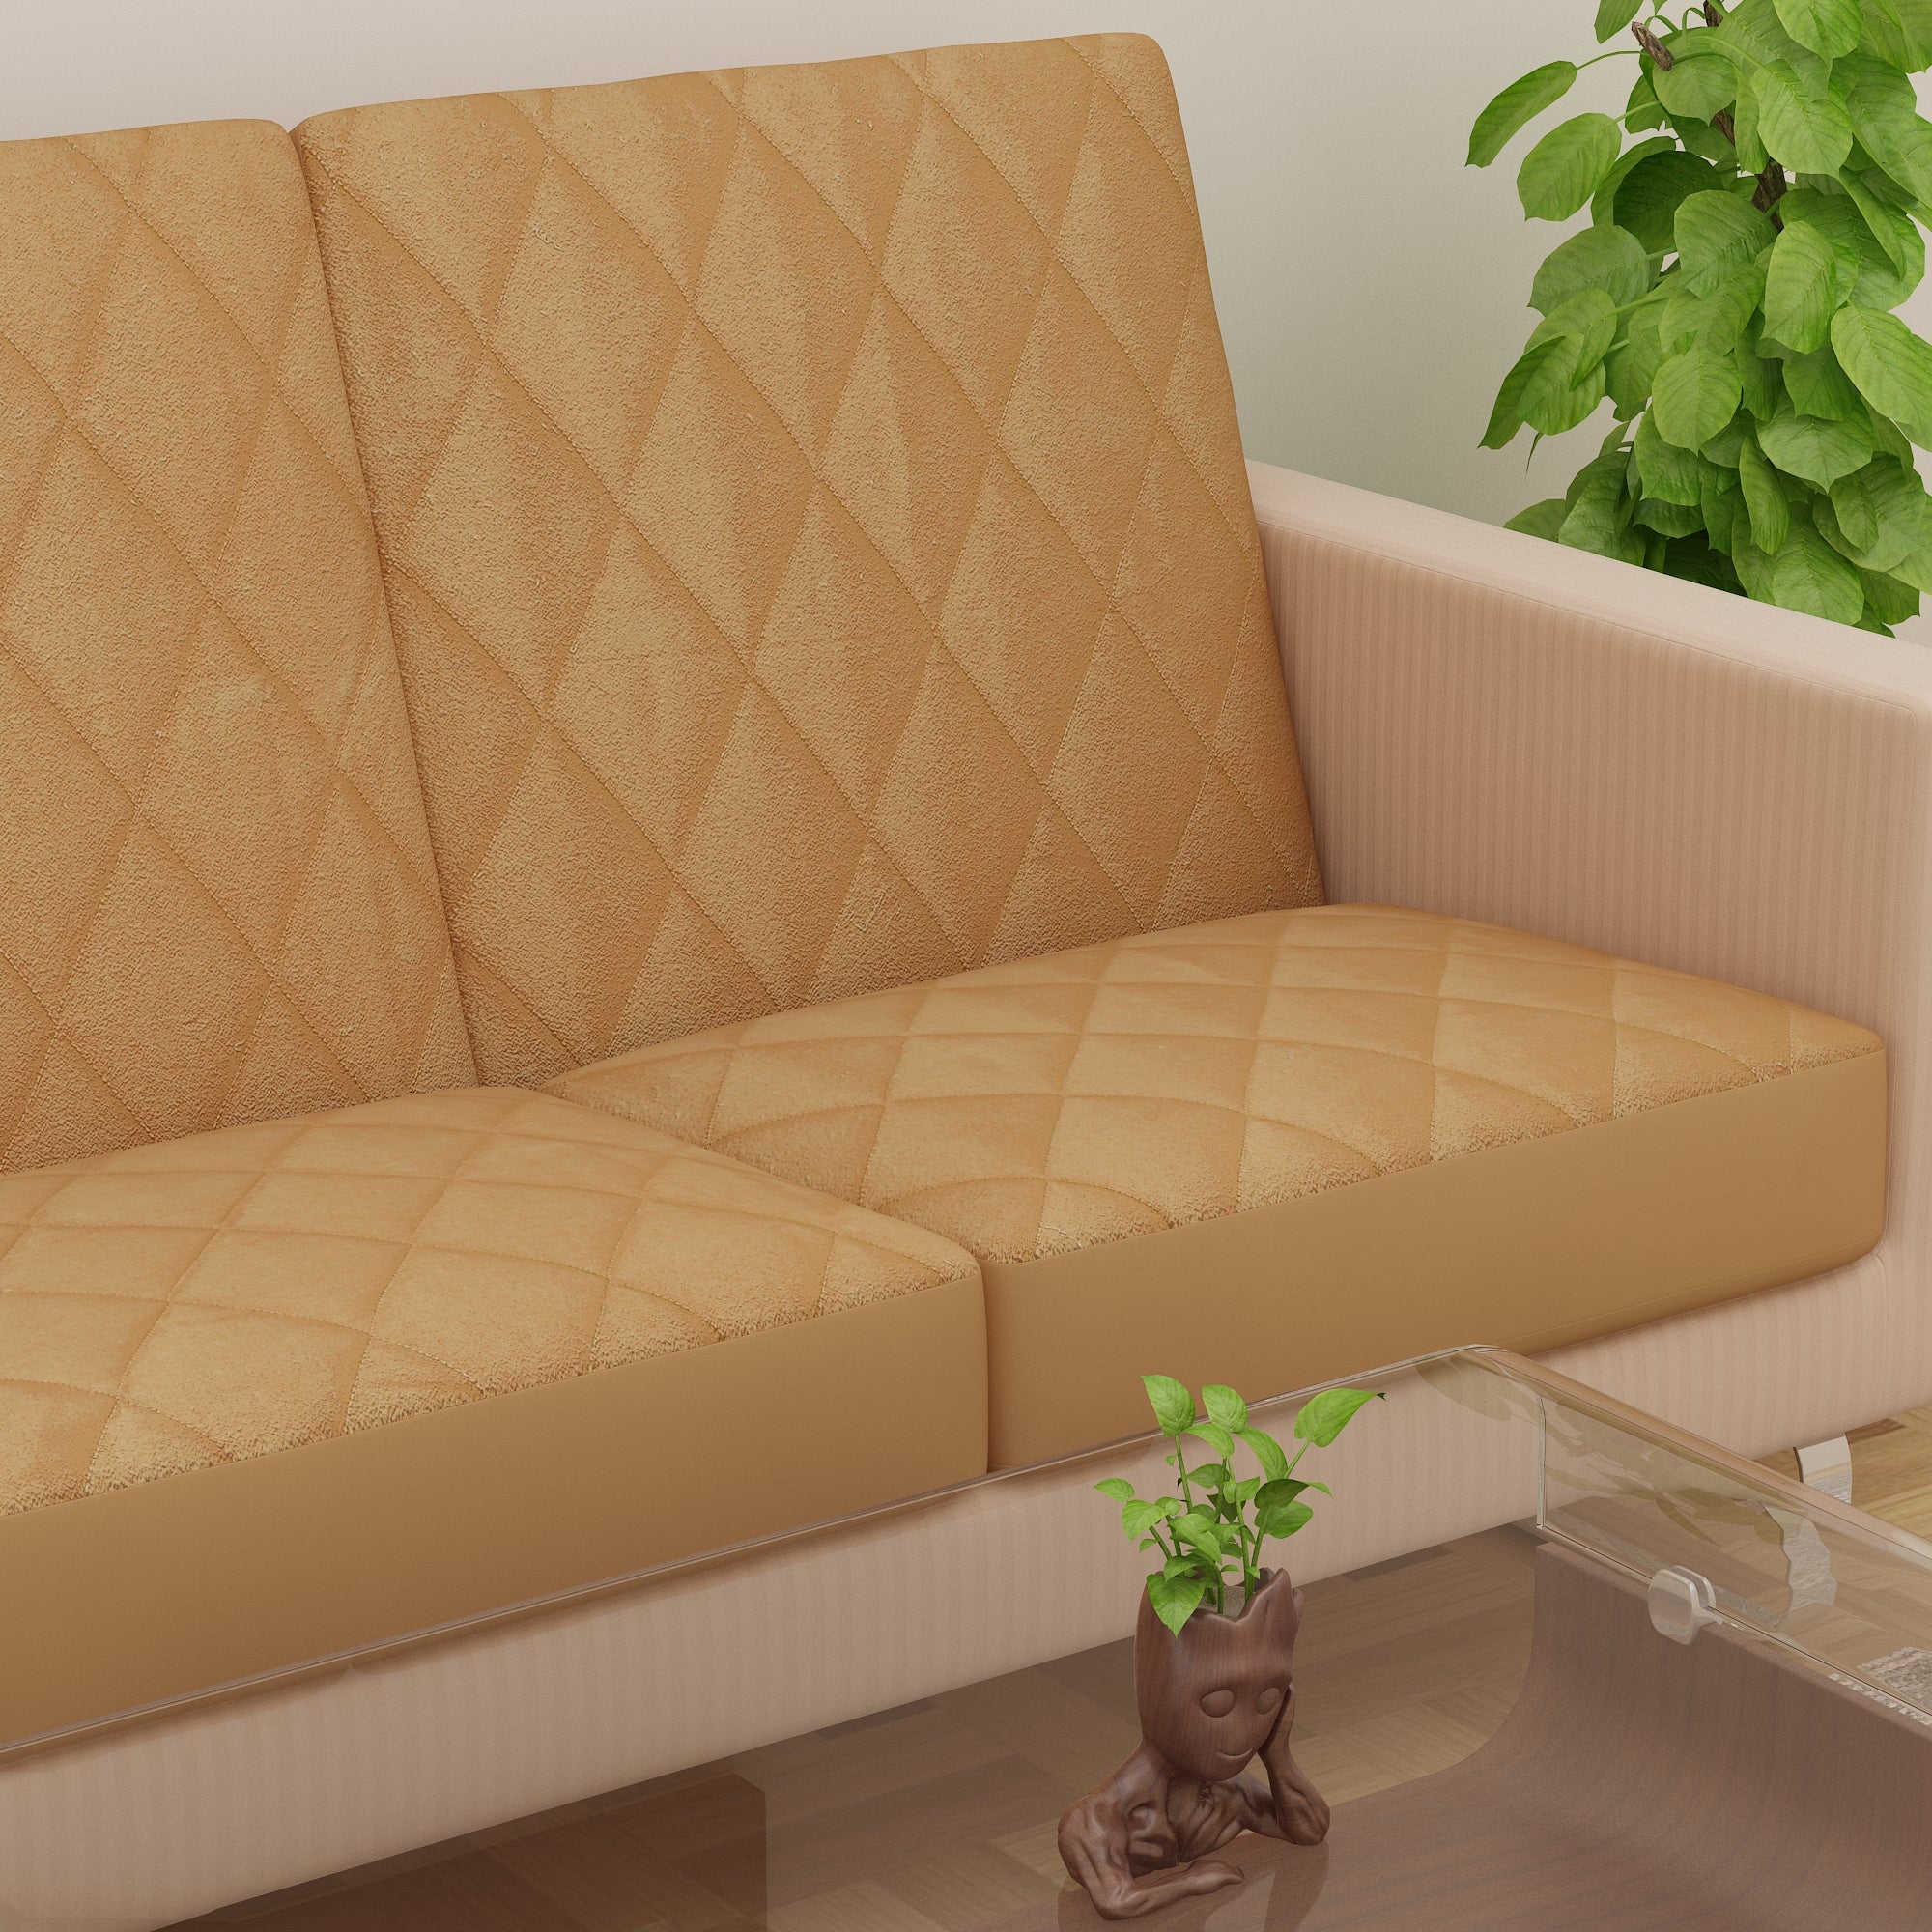 Sapphire Quilted Waterproof Sofa Seat Protector Cover with Stretchable Elastic, Beige